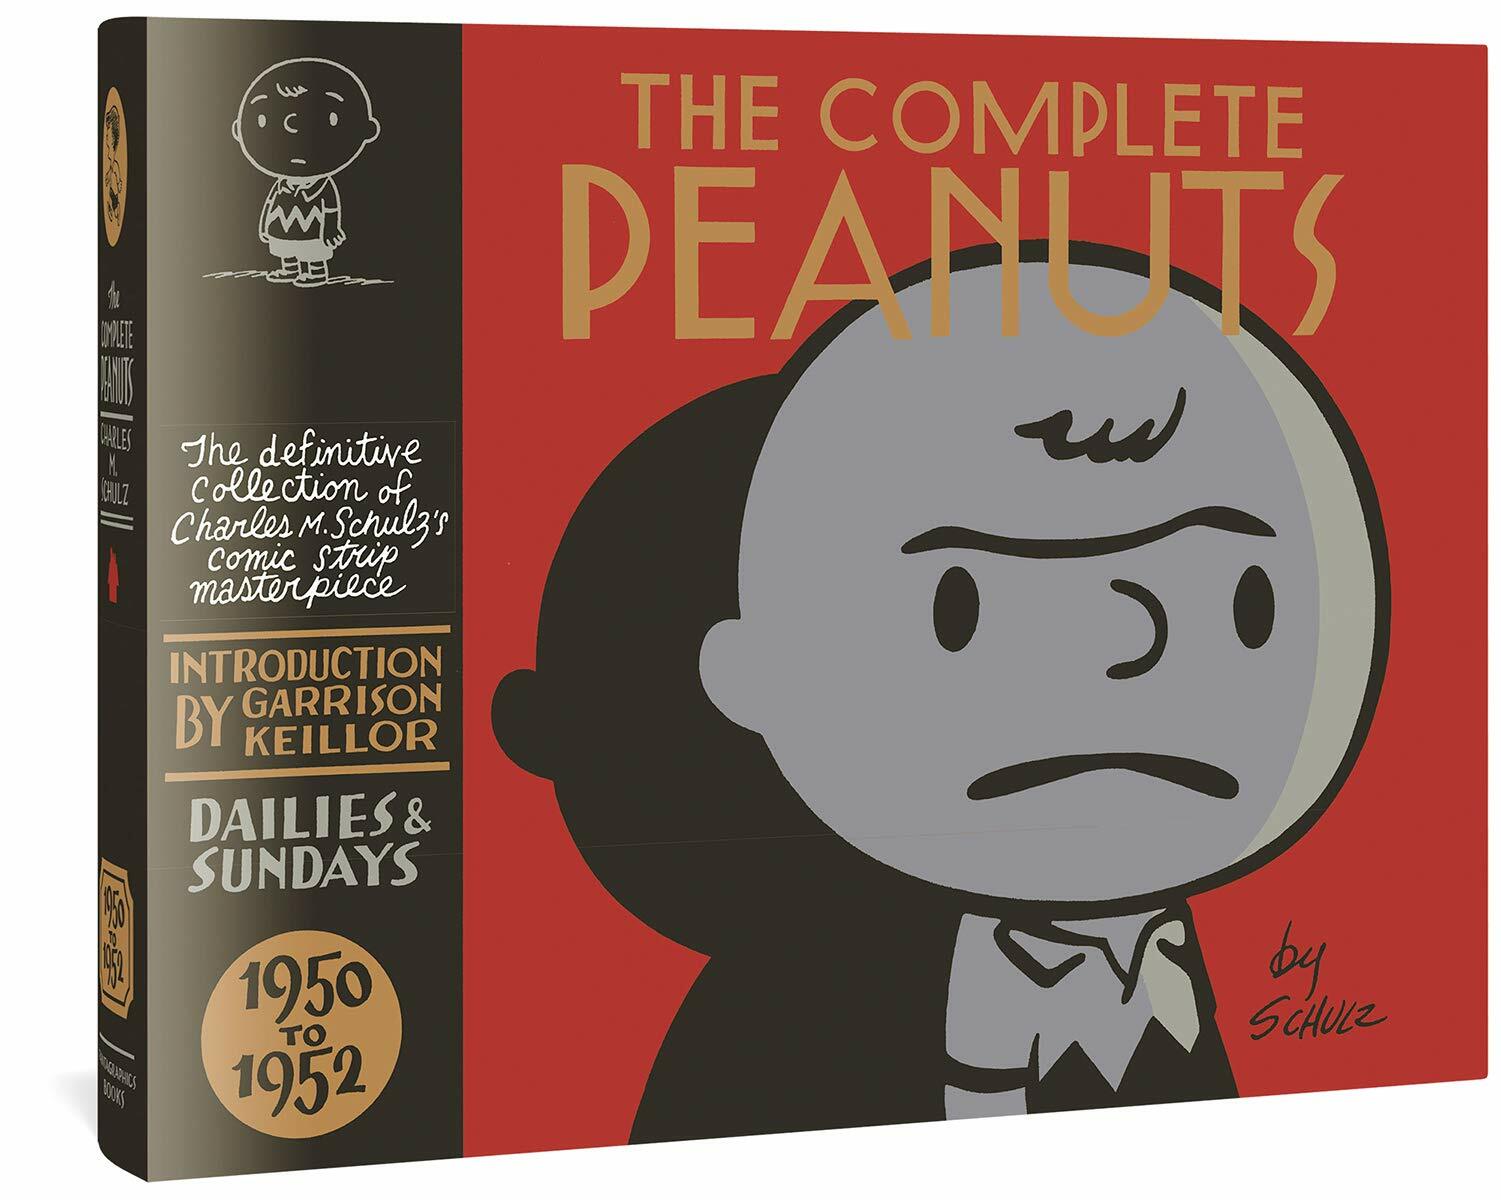 The Complete Peanuts 1950-1952 (Hardcover)